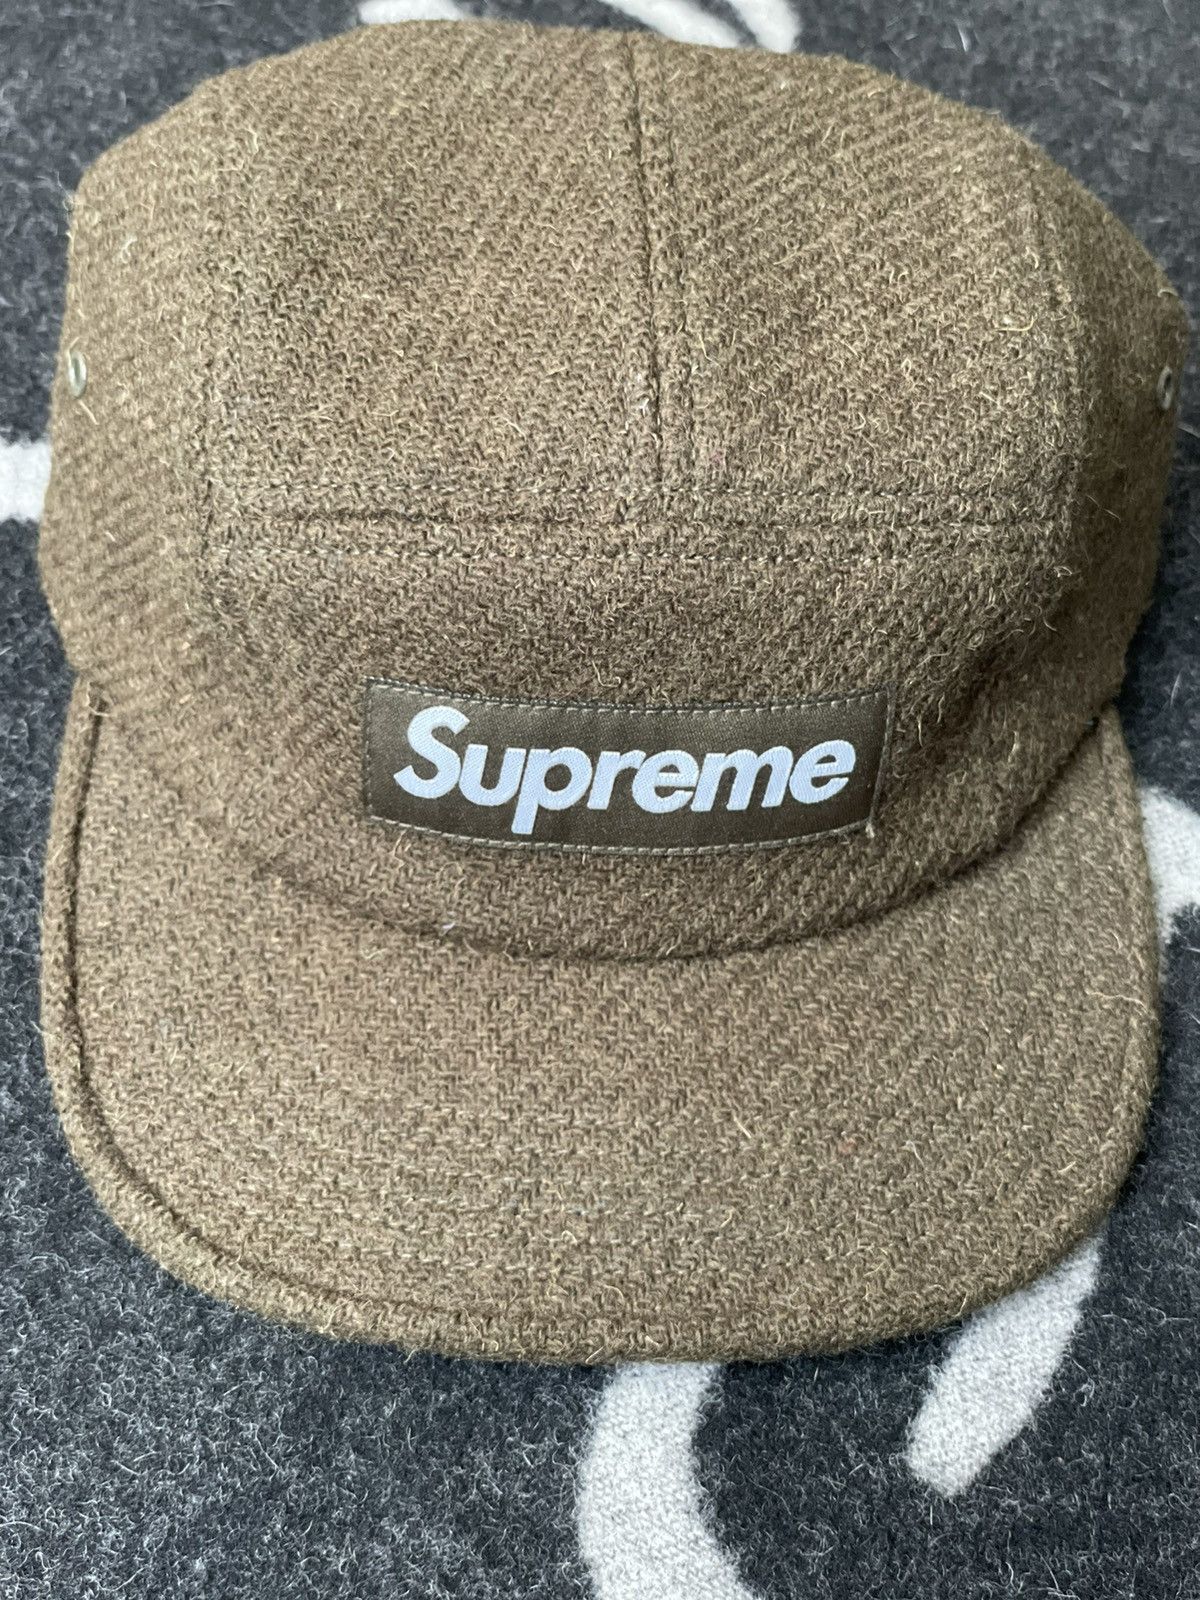 Supreme Featherweight Wool Camp Cap - Olive | Grailed